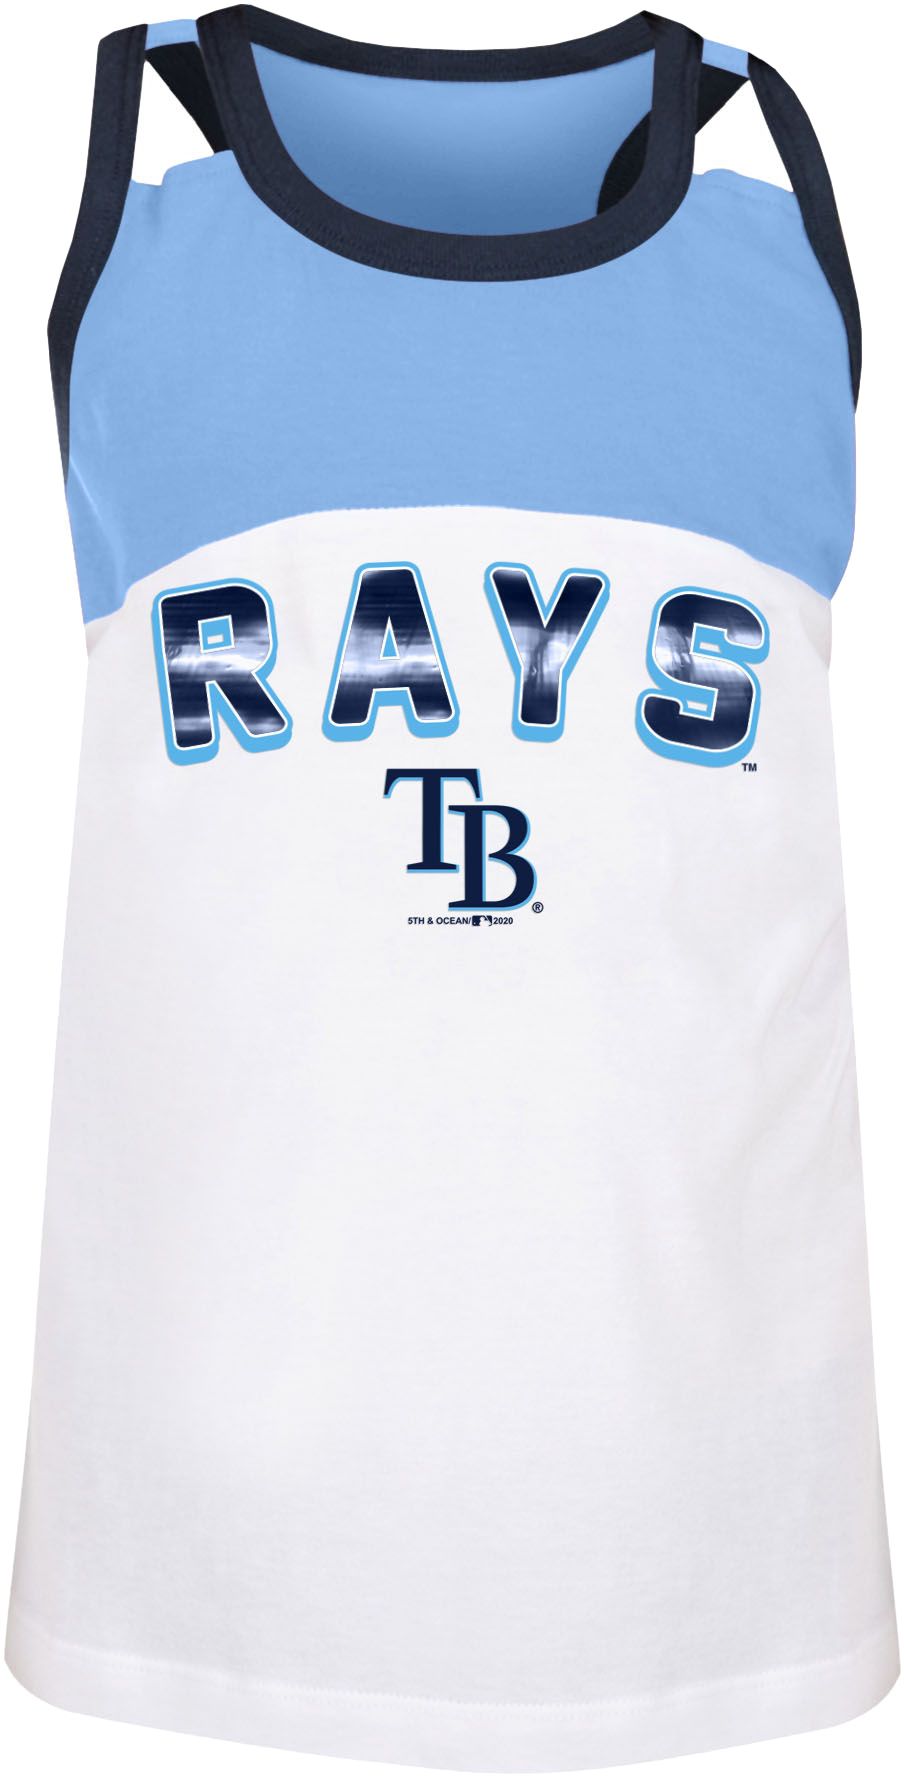 New Era / Youth Girls' Tampa Bay Rays Blue Spandex Baby Jersey Tank Top